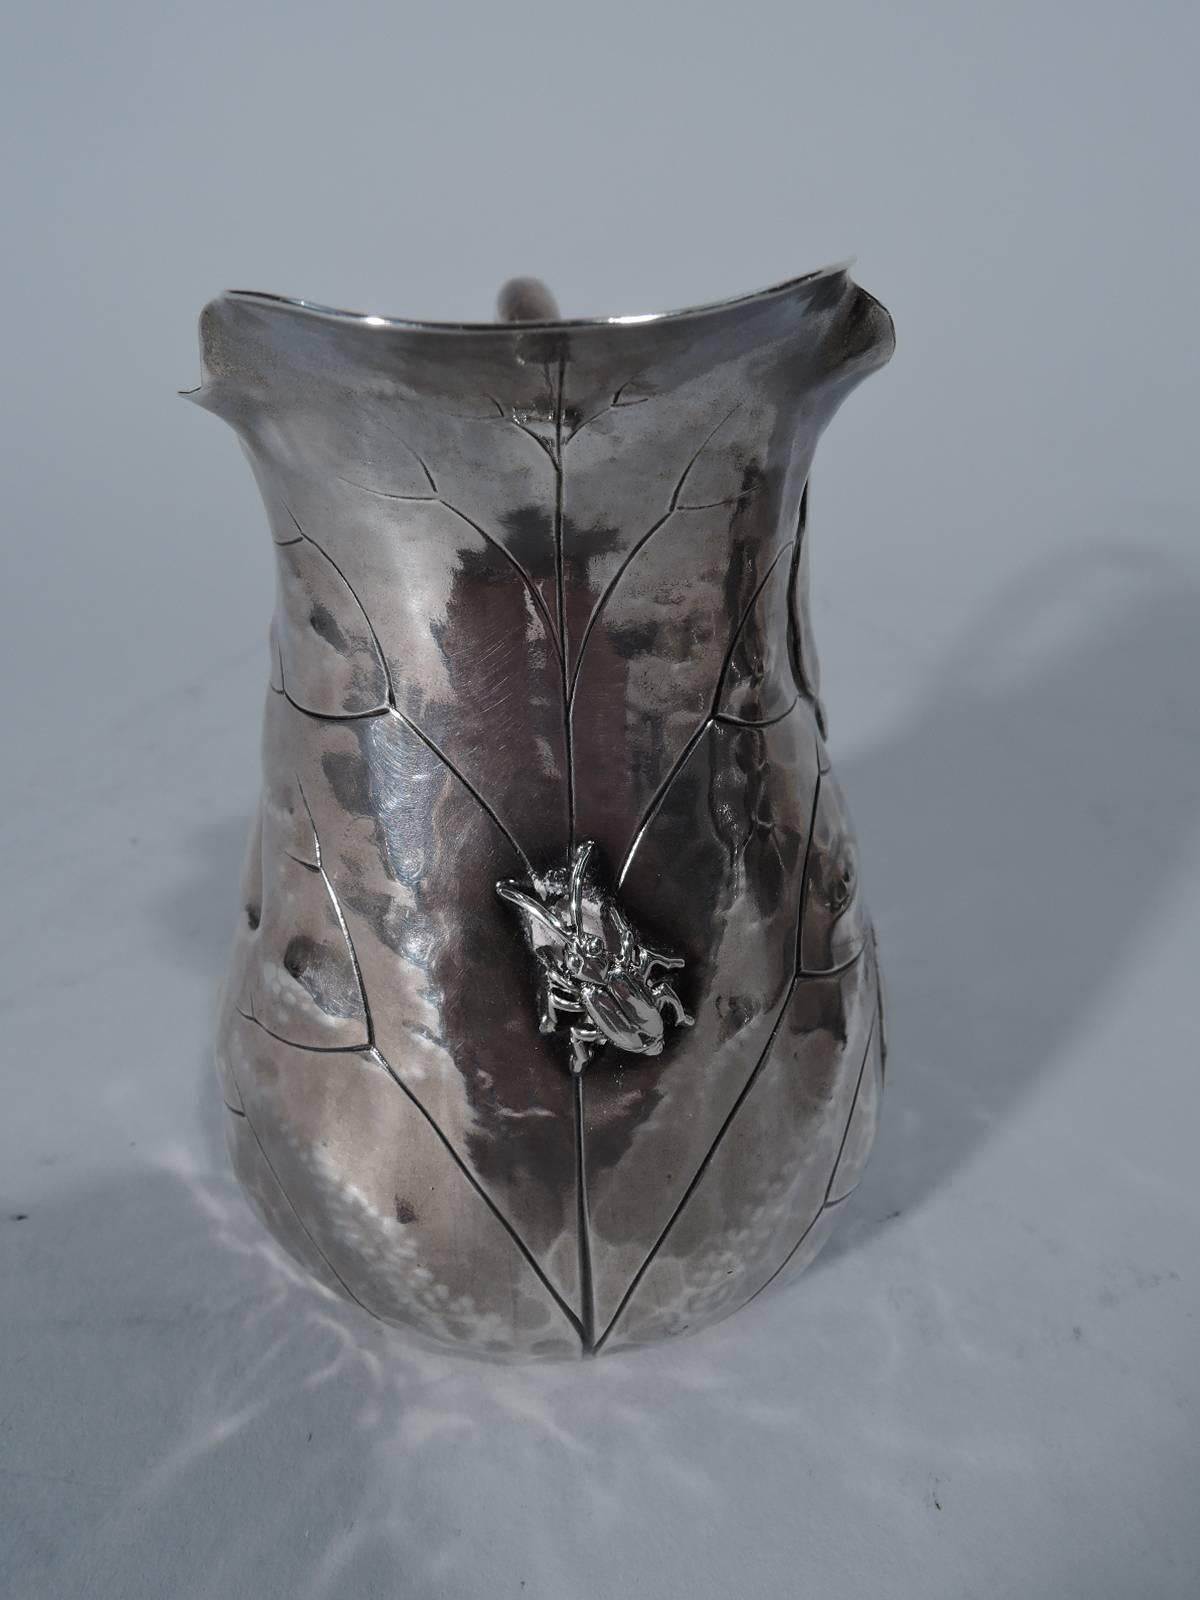 American Shiebler Japonesque Sterling Silver Creamer and Sugar with Applied Bugs